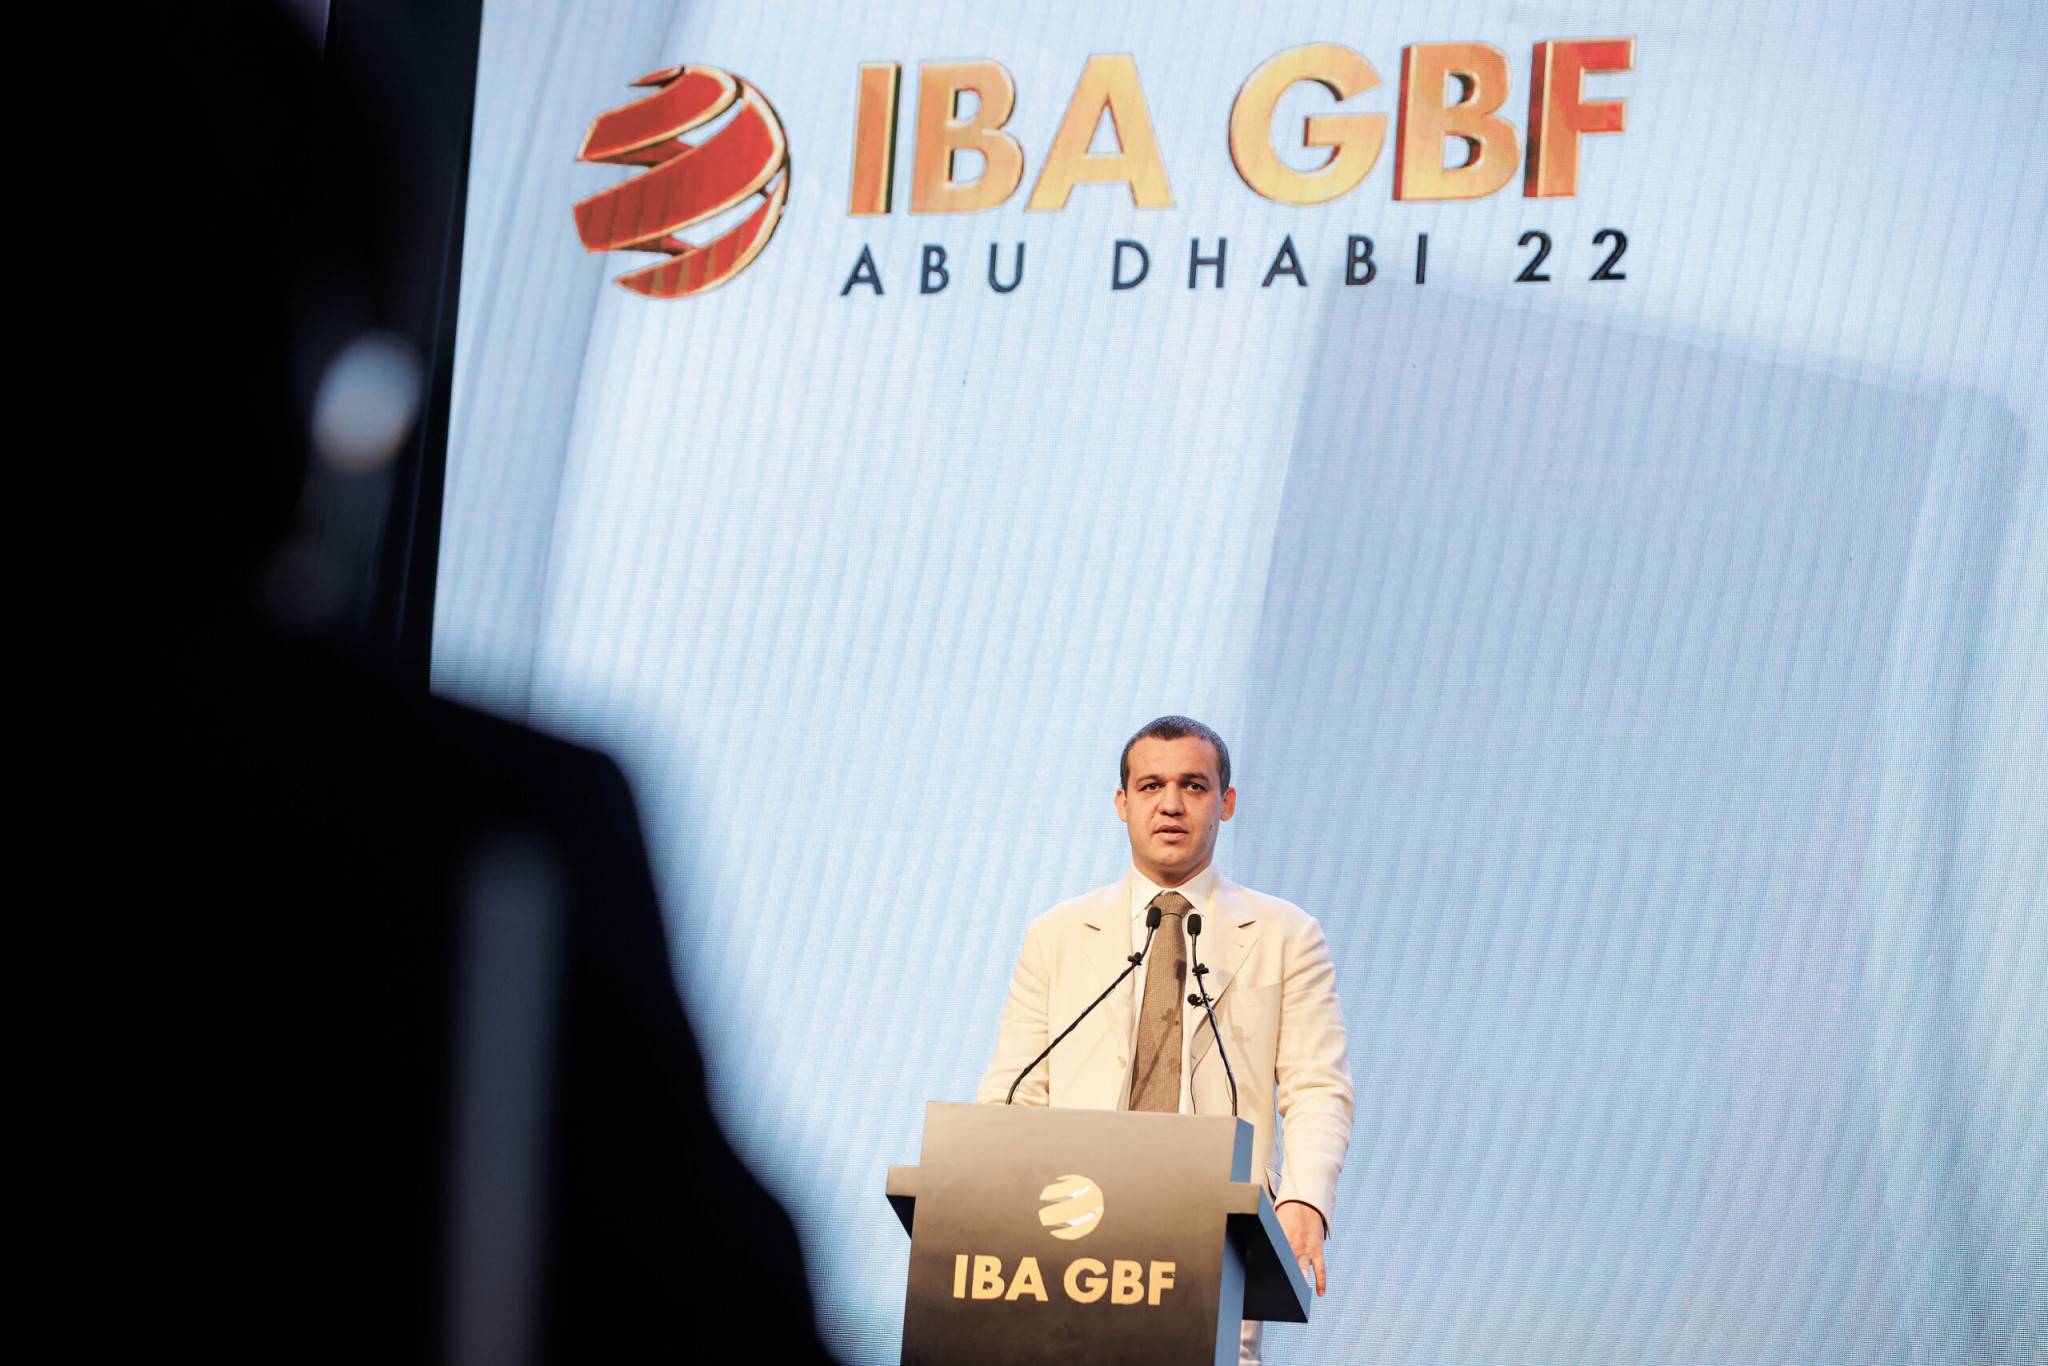 The IBA, led by Umar Kremlev, has criticised the IOC for failing to provide a 